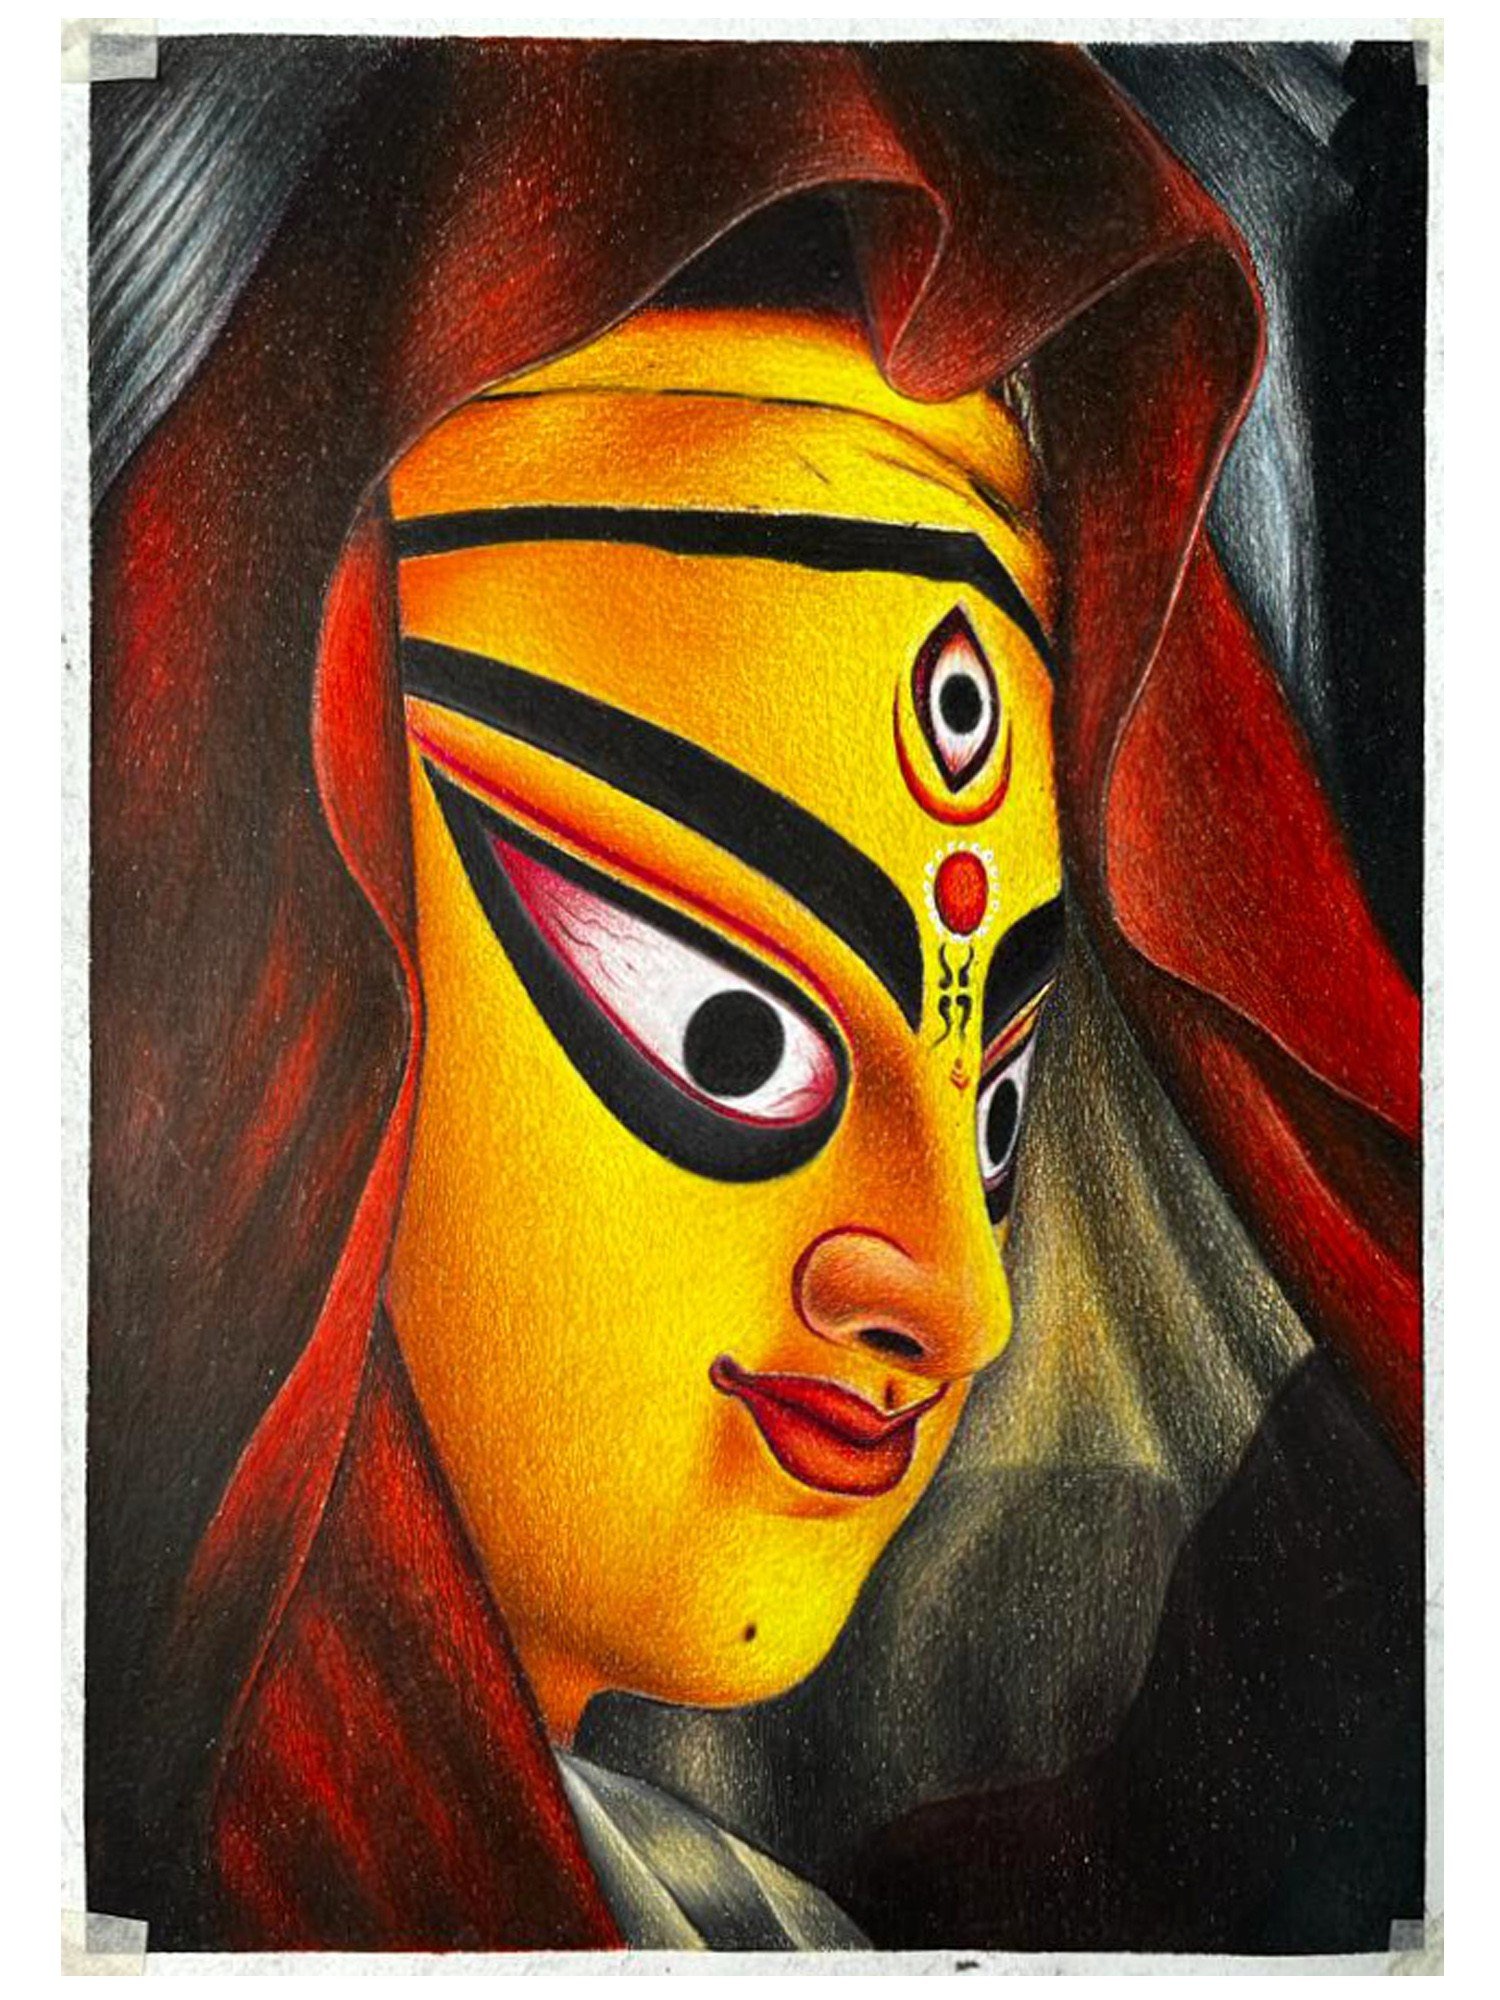 TARGET PUBLICATIONS Maa Durga Pen Sketch Drawing Mandala Art Frame |Indian  Art Painting | Symbol of Strength and Protection | Black Wooden Frame 13 x  9.5 inch : TARGET PUBLICATIONS: Amazon.in: Home & Kitchen